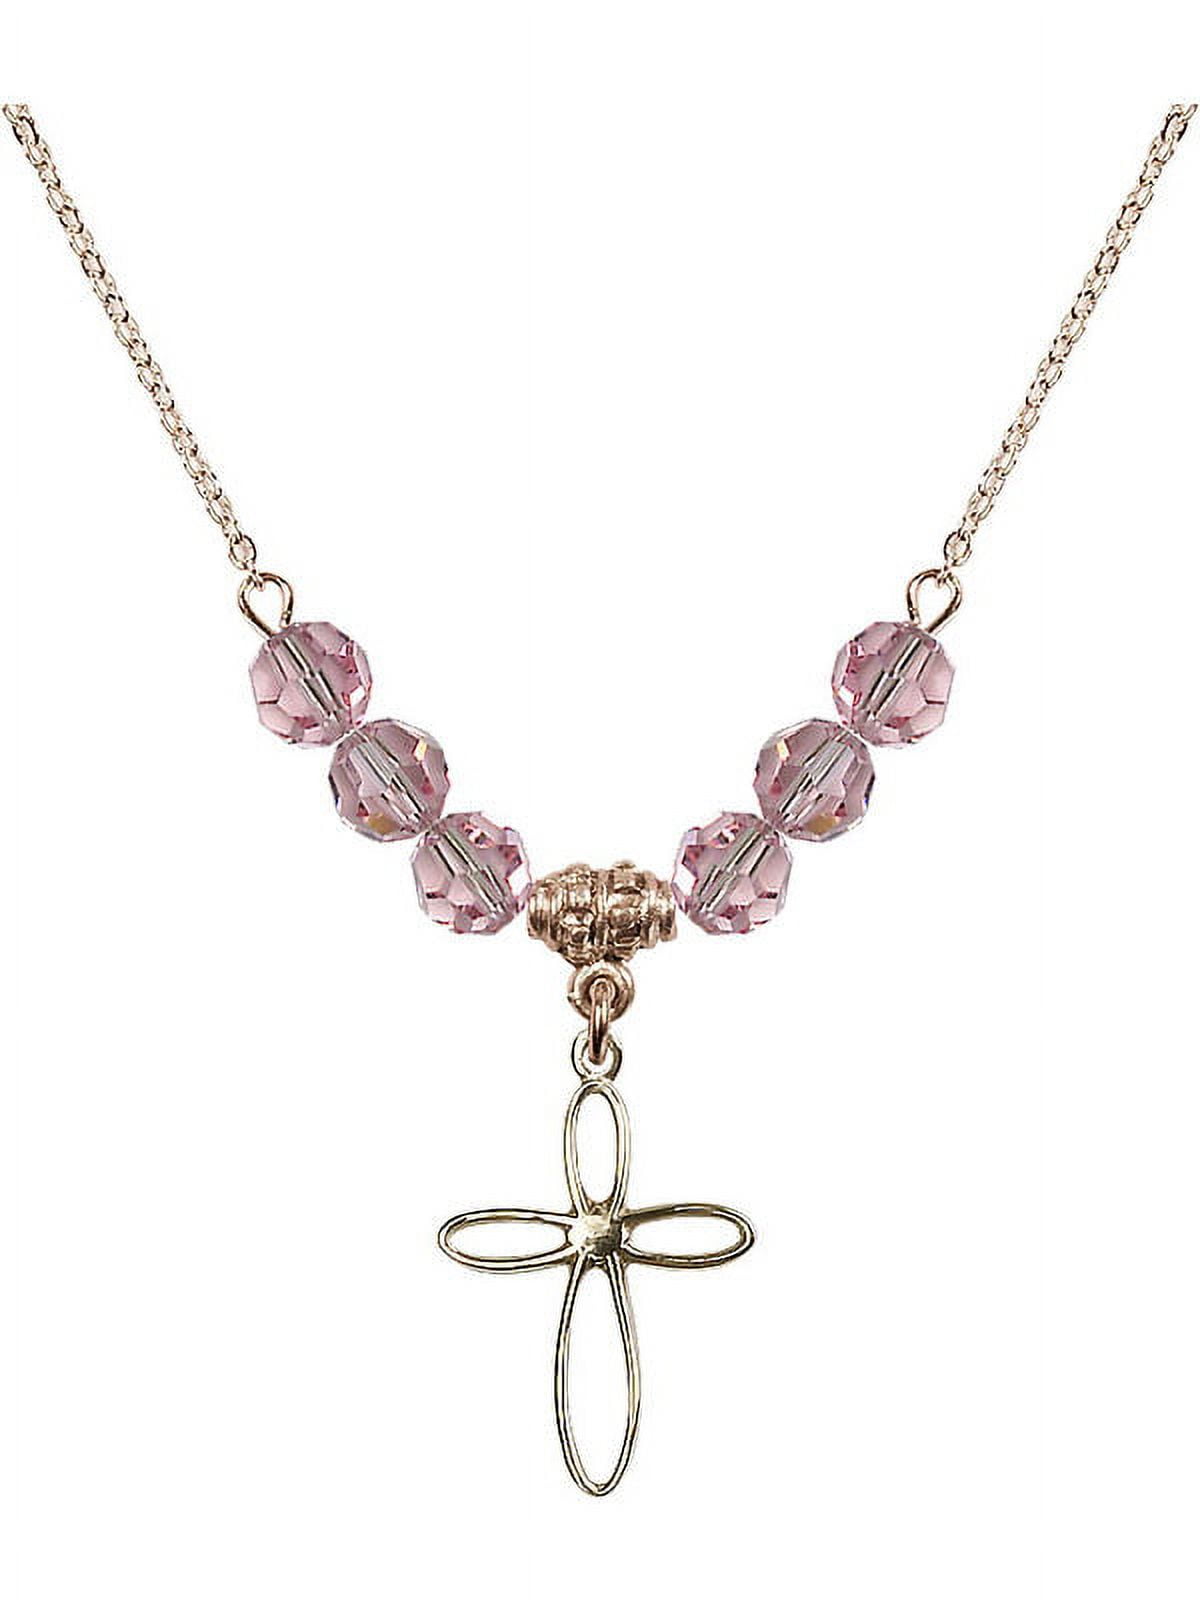 18-Inch Hamilton Gold Plated Necklace with 6mm Light Rose Pink